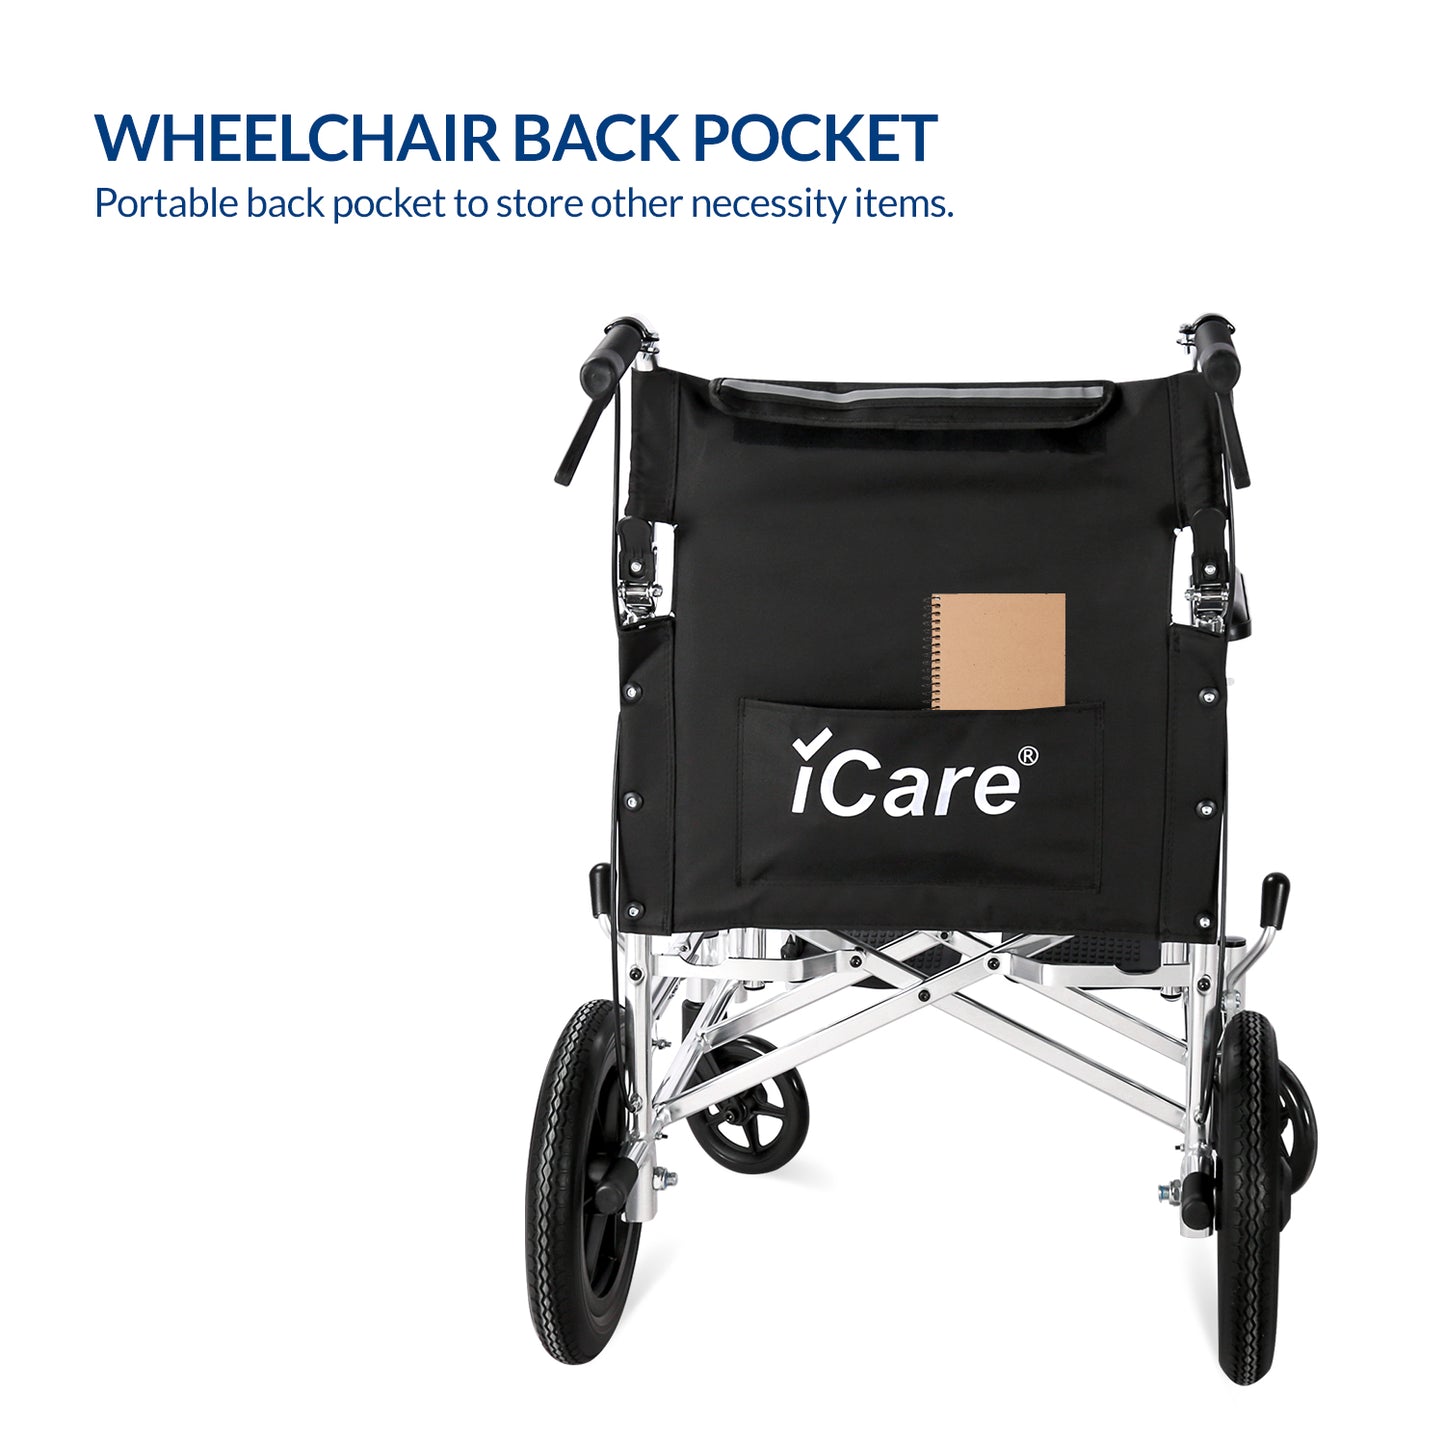 iCare® MA111 Guide Aluminum Manual Wheelchair with Handle Brakes, Aluminum frame and Anti-Slip foot pedals for Disabled and Elderly